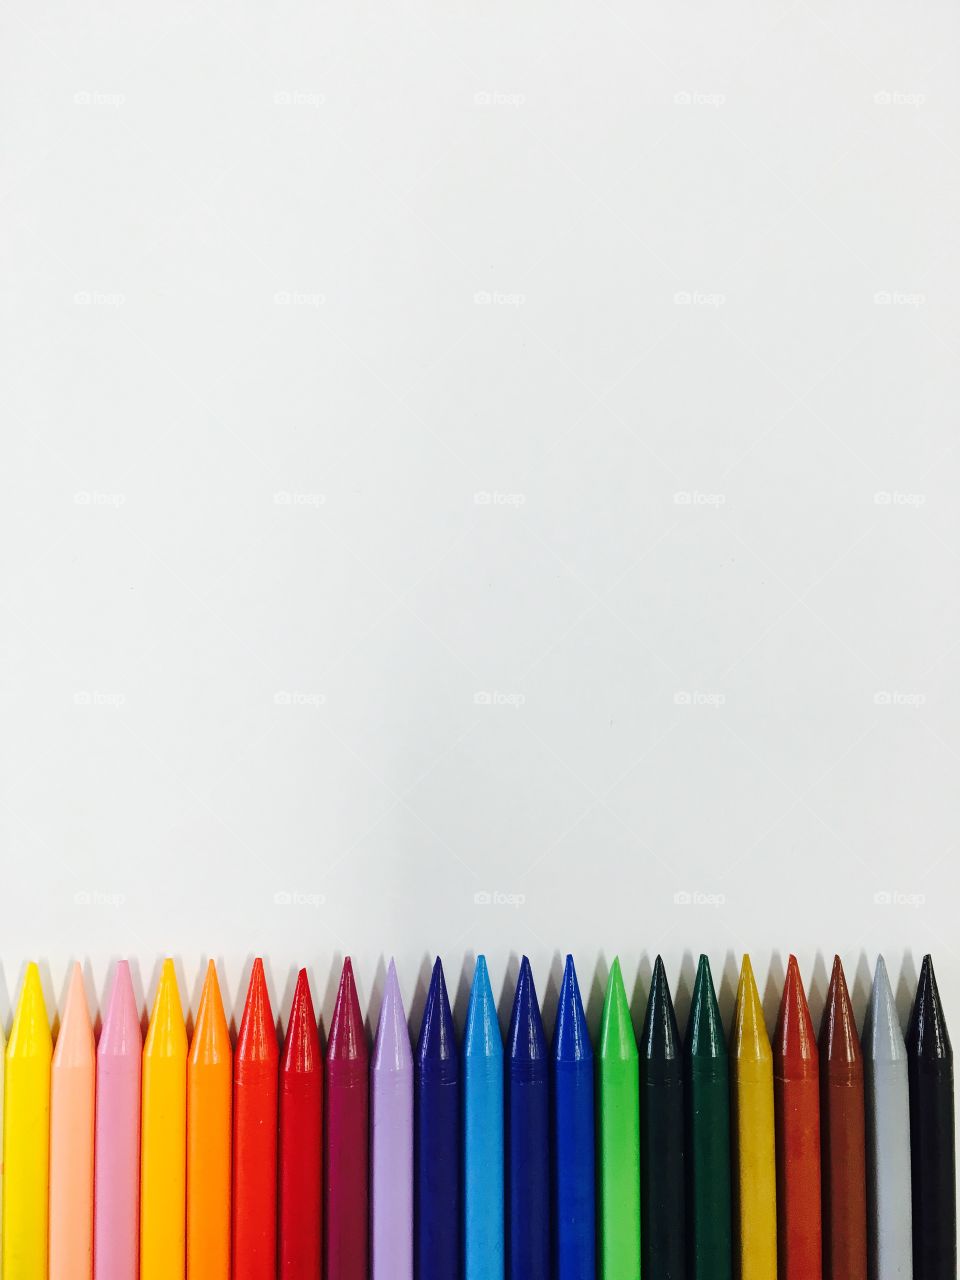 Crayons background theme. Would be great for school presentations, photo collages, posters etc...